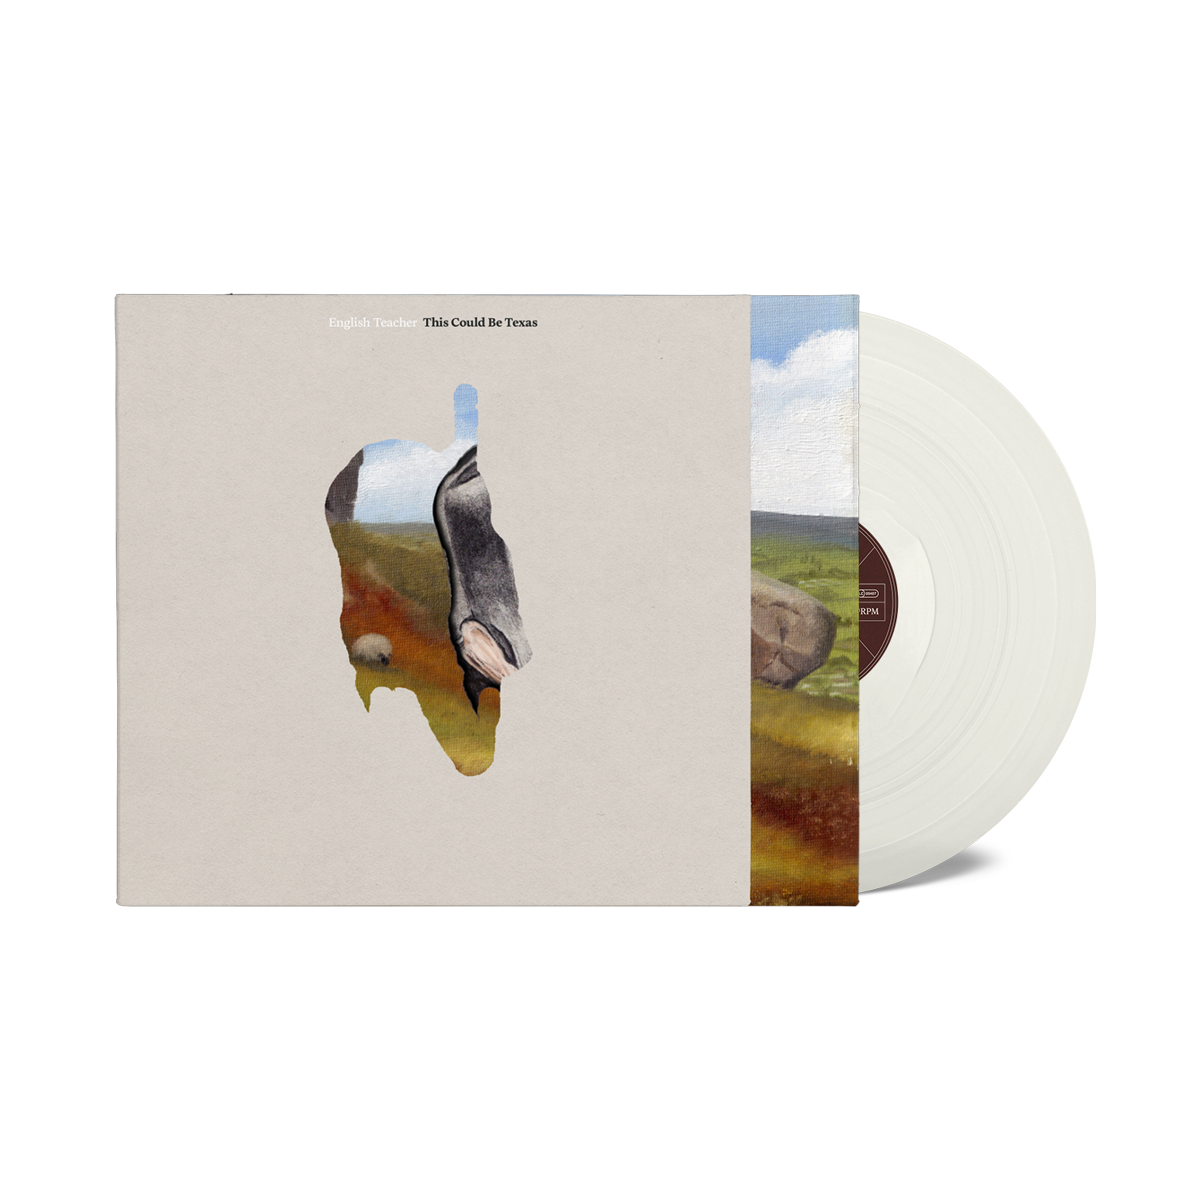 This Could Be Texas: Limited Milky White Vinyl LP, Scarf + Signed Art Card